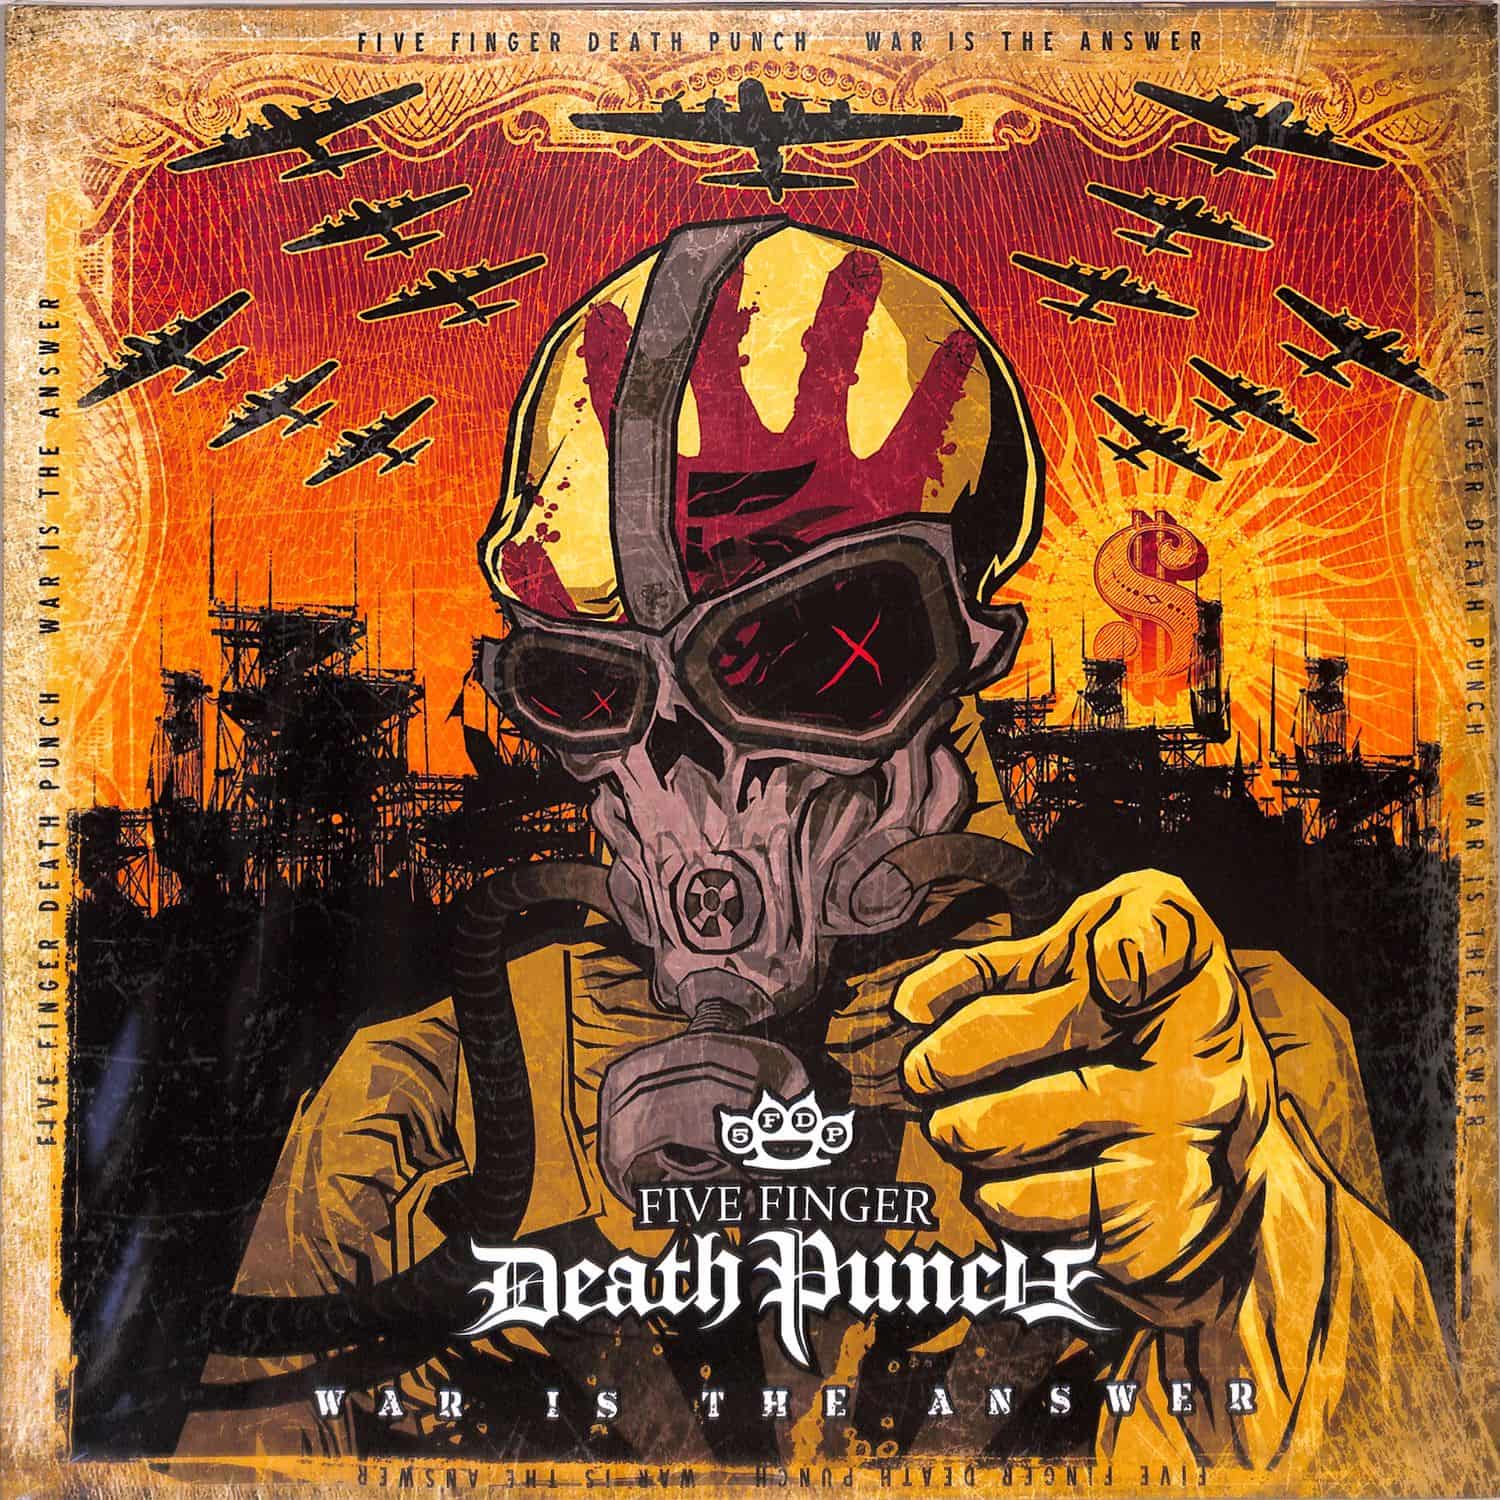 Five Finger Death Punch - WAR IS THE ANSWER 